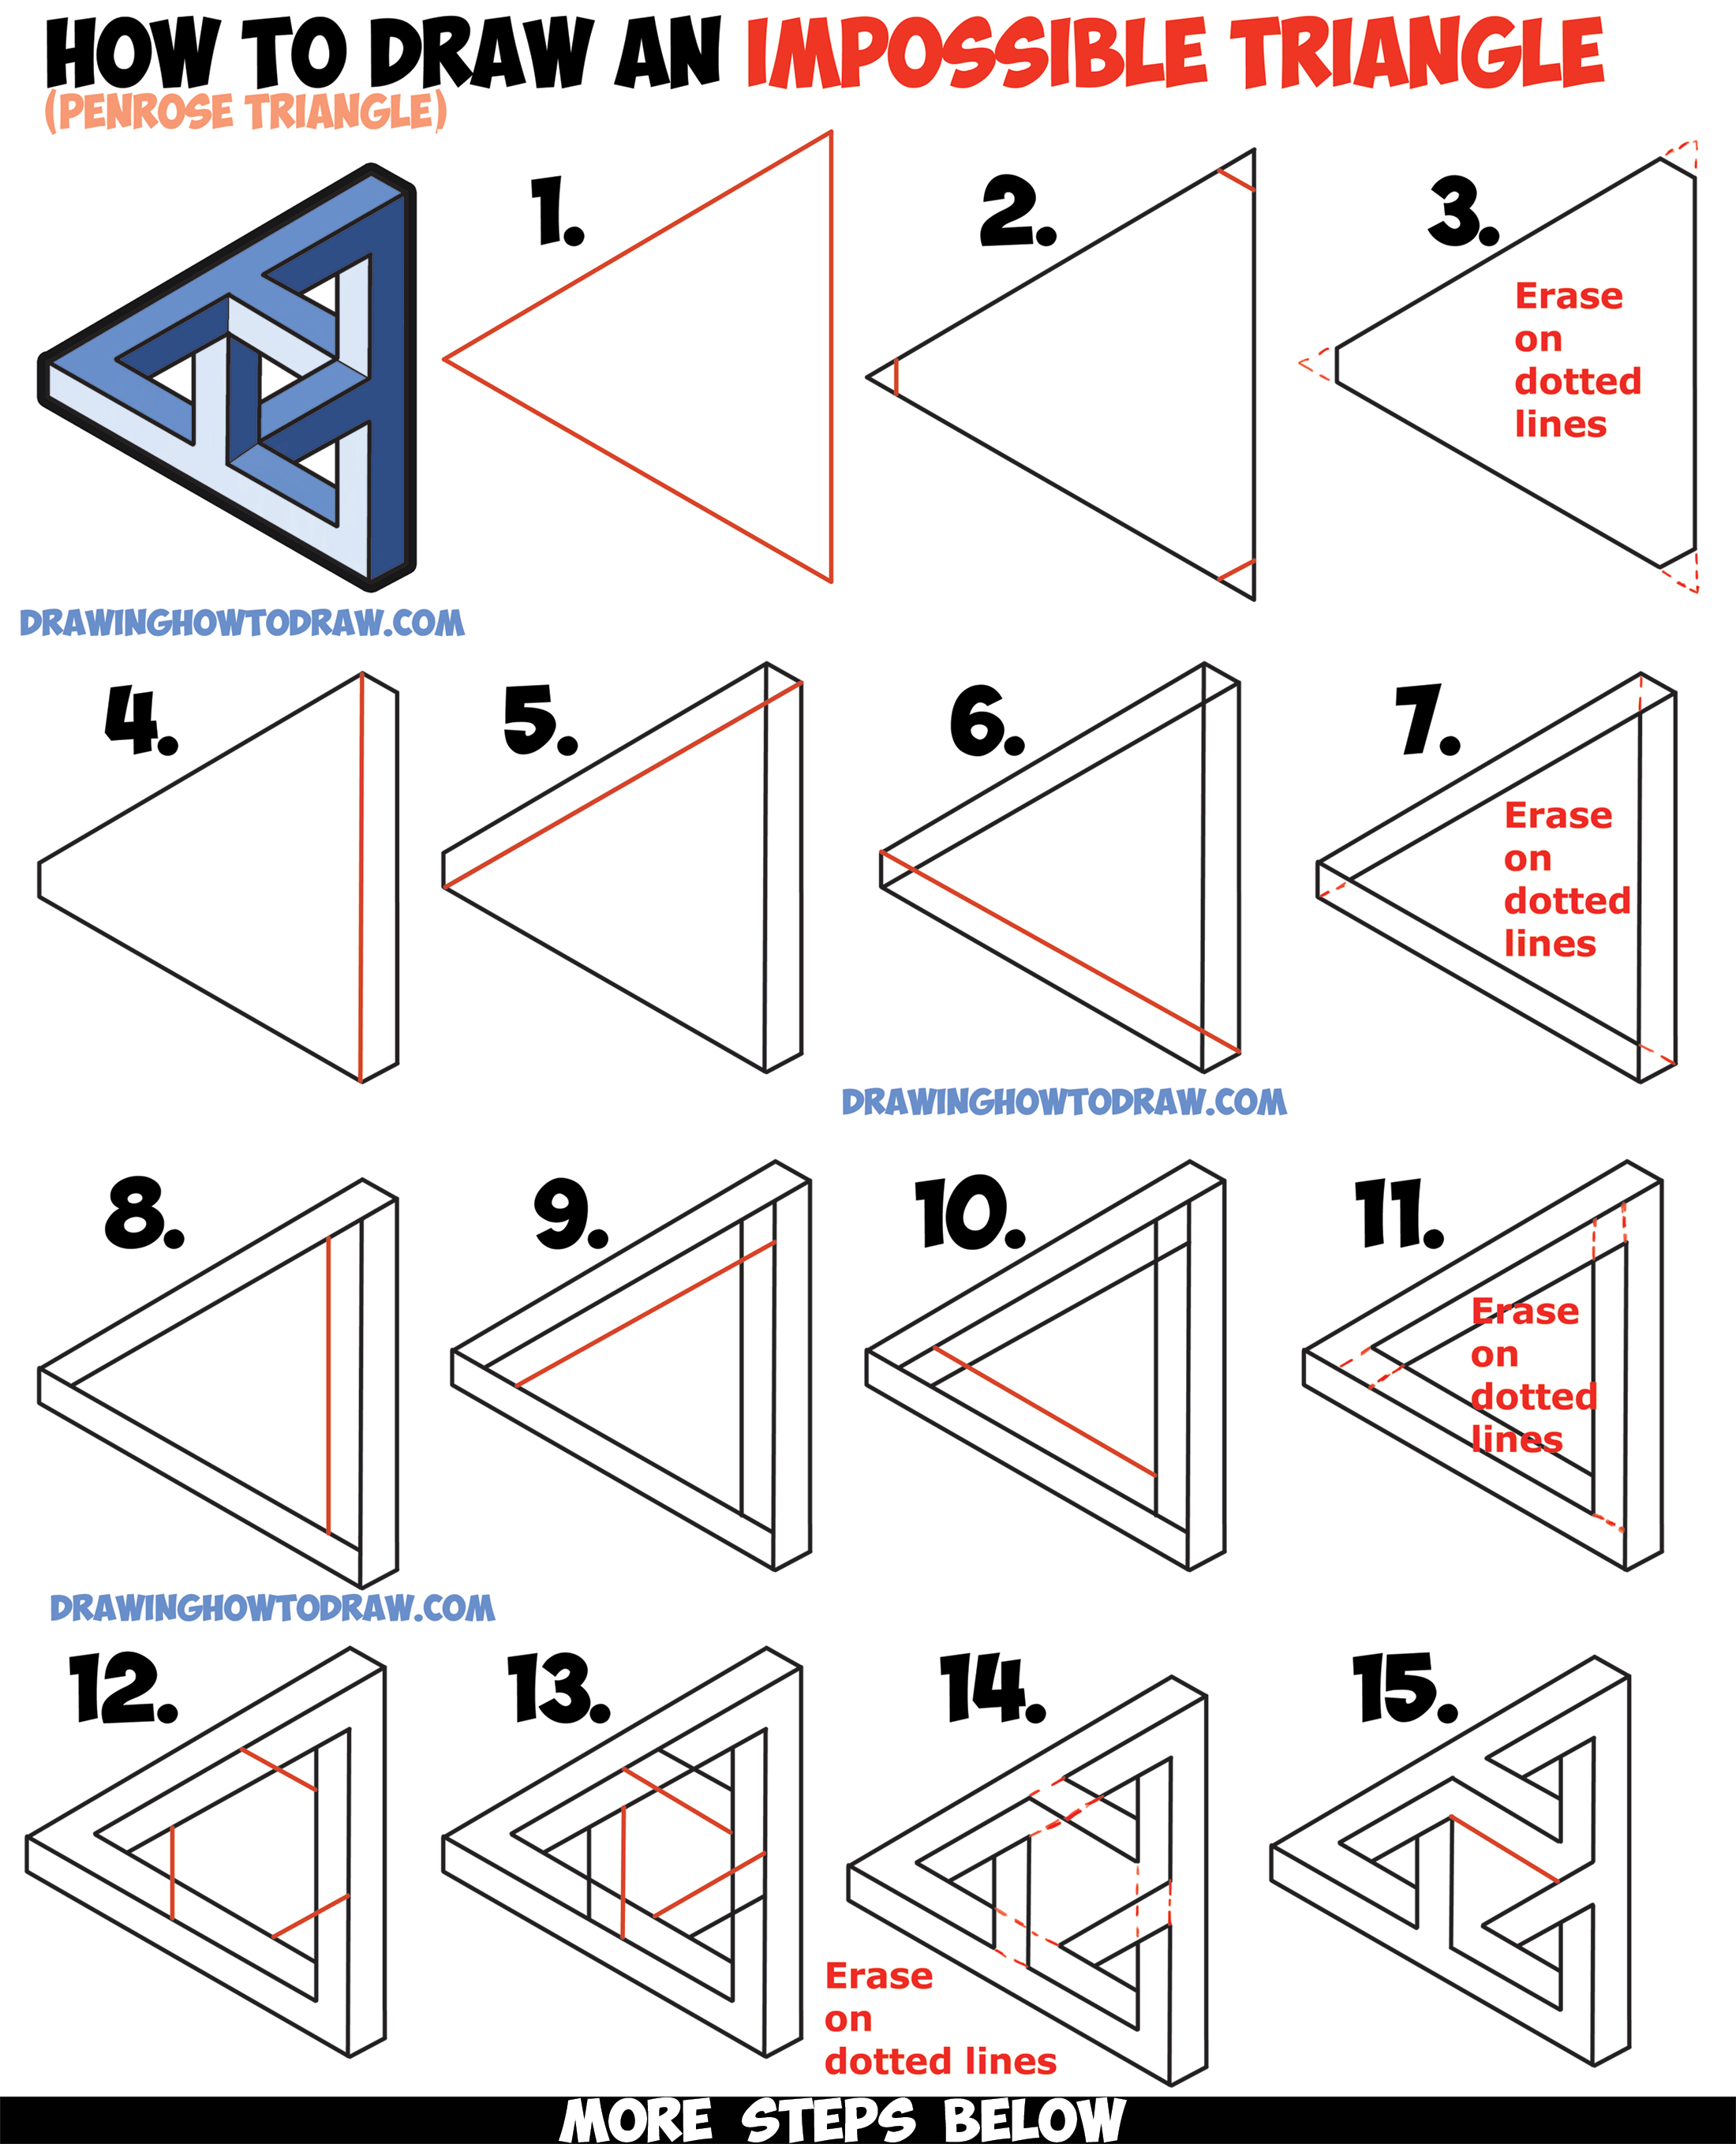 How to Draw an Impossible Triangle (Penrose Triangle) That Looks Woven